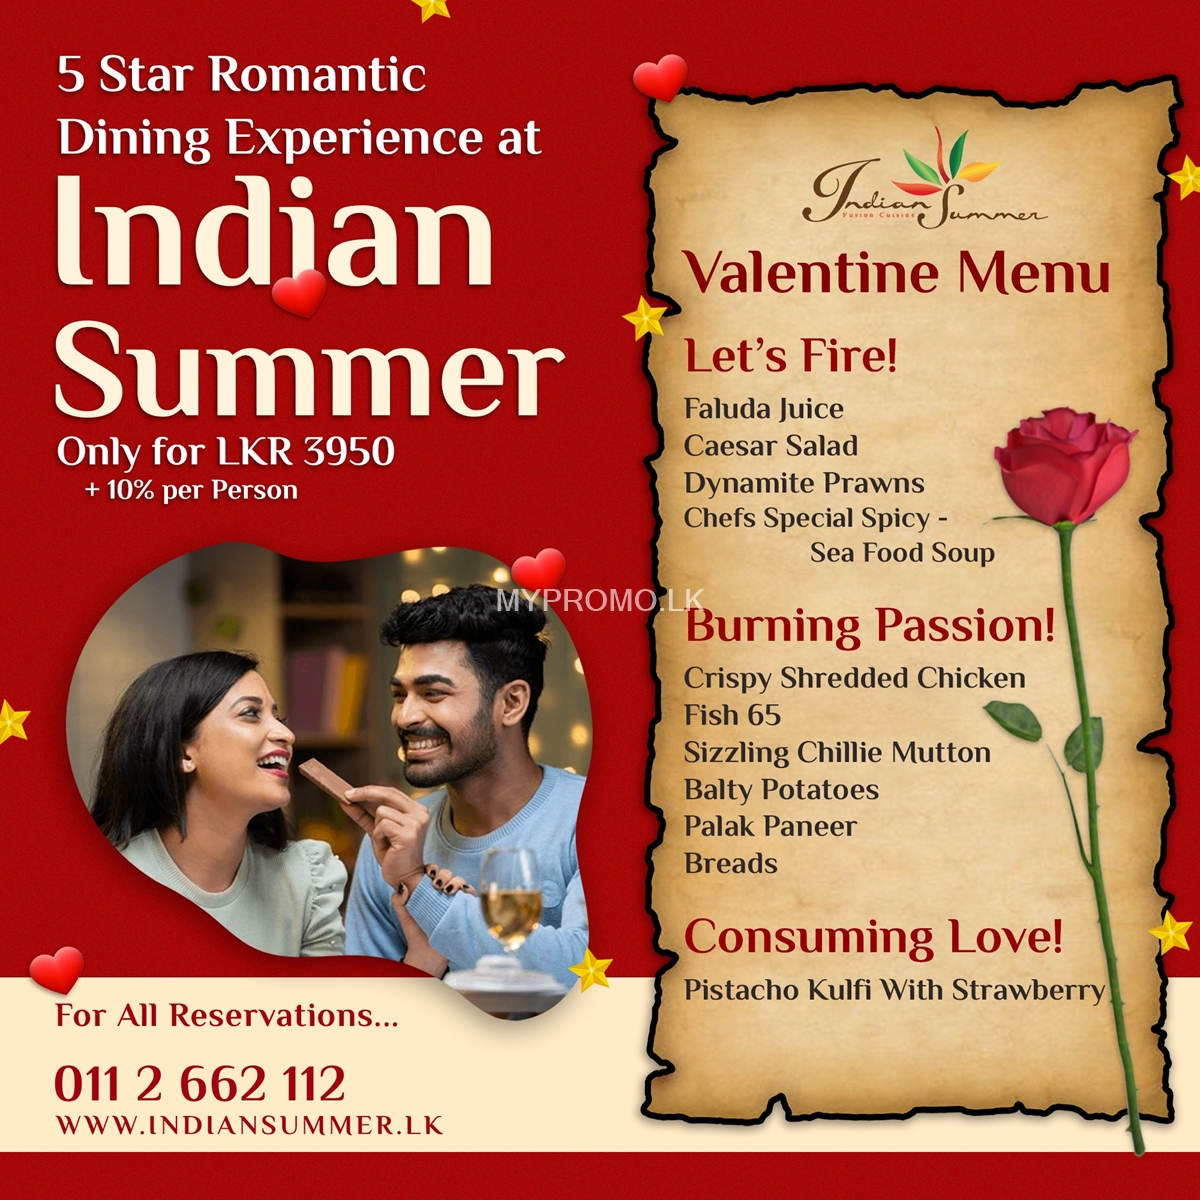 Indulge in a 5-star romantic dining experience at Indian Summer